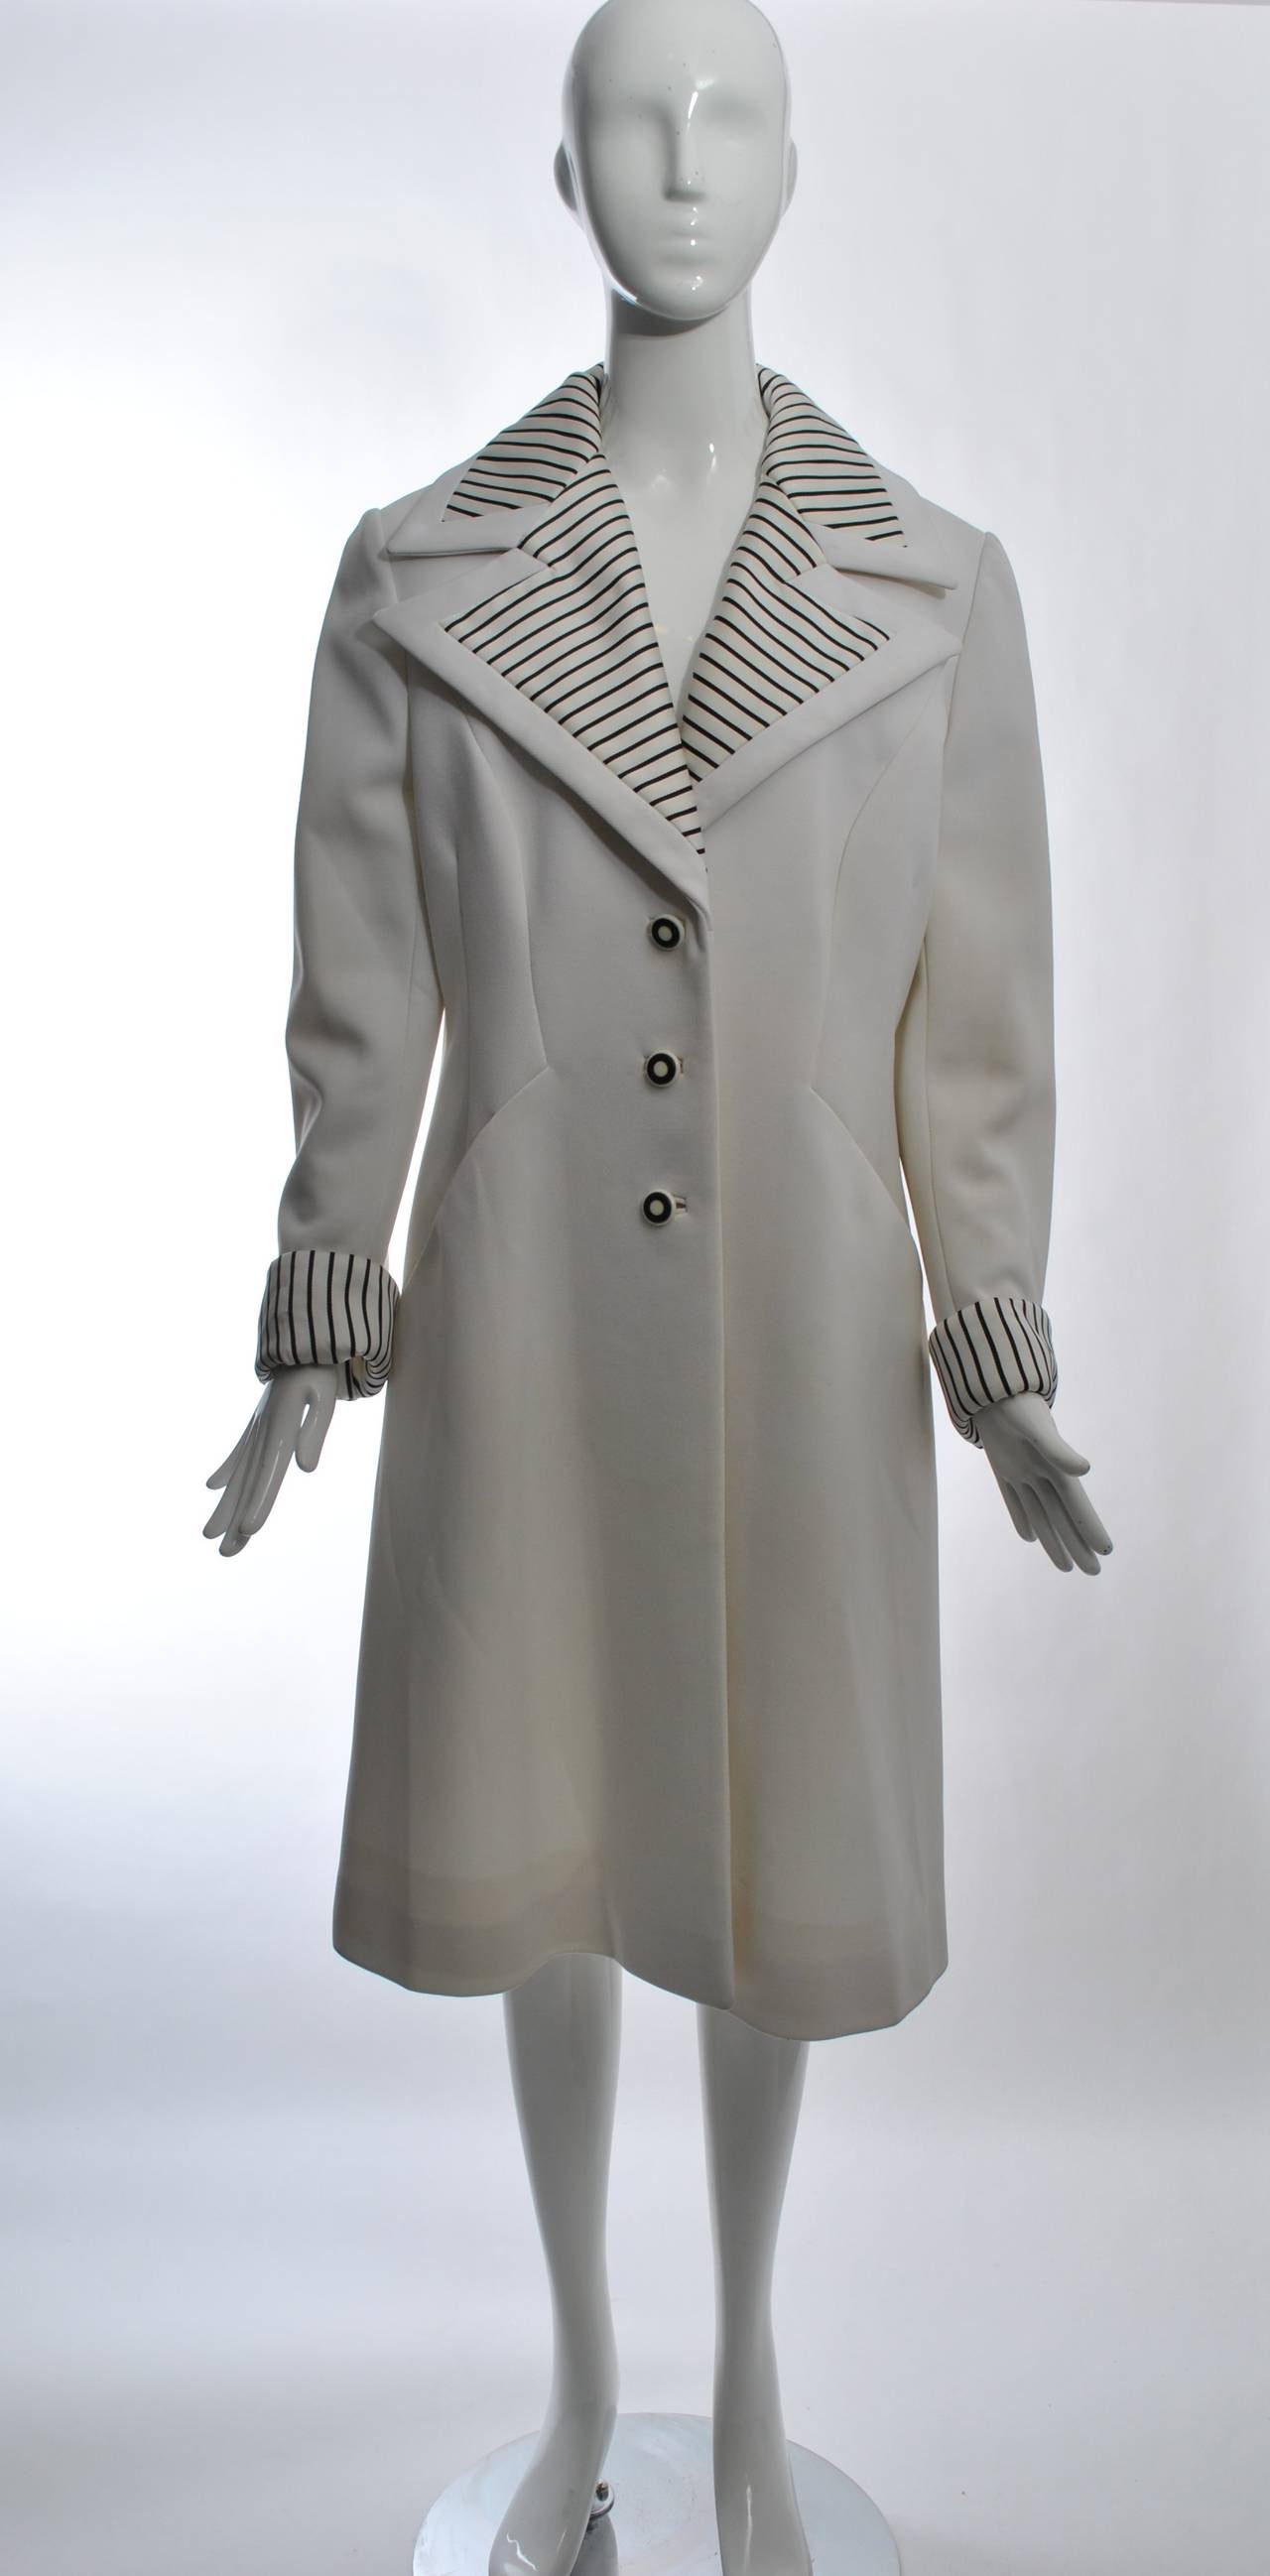 Lilli Ann white polyester coat with wide spread collar and cuffs faced in black and white stripes. Slanted, integral pockets, back belt, and black and white buttons complete the look. Size L.